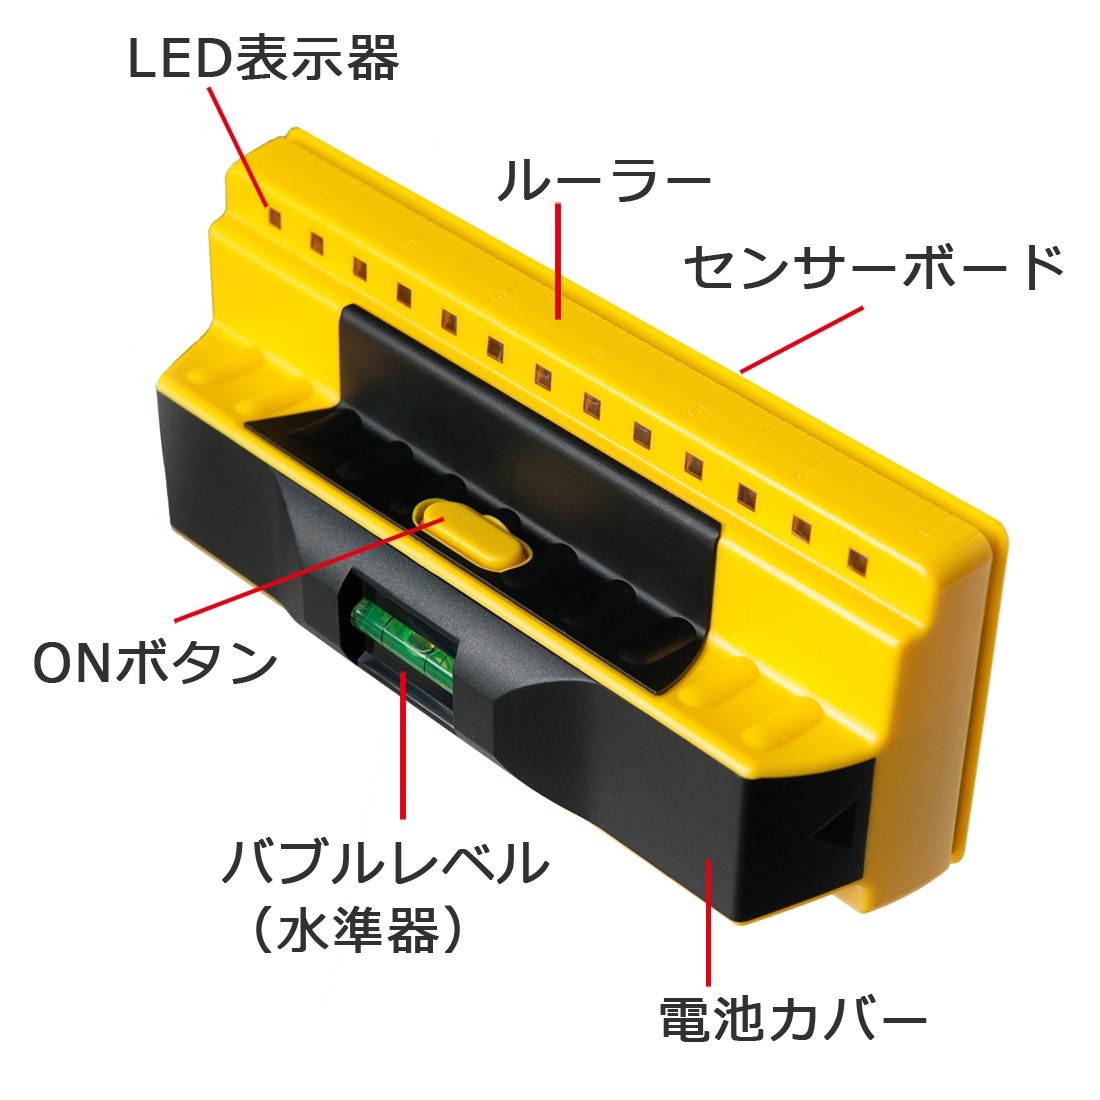  wall reverse side sensor all rice No.1. groundwork sensor professional American patent (special permission) acquisition interval pillar groundwork searching Frank Lynn ProSensor 710+ ( domestic regular goods | Japanese instructions |1 year with guarantee )